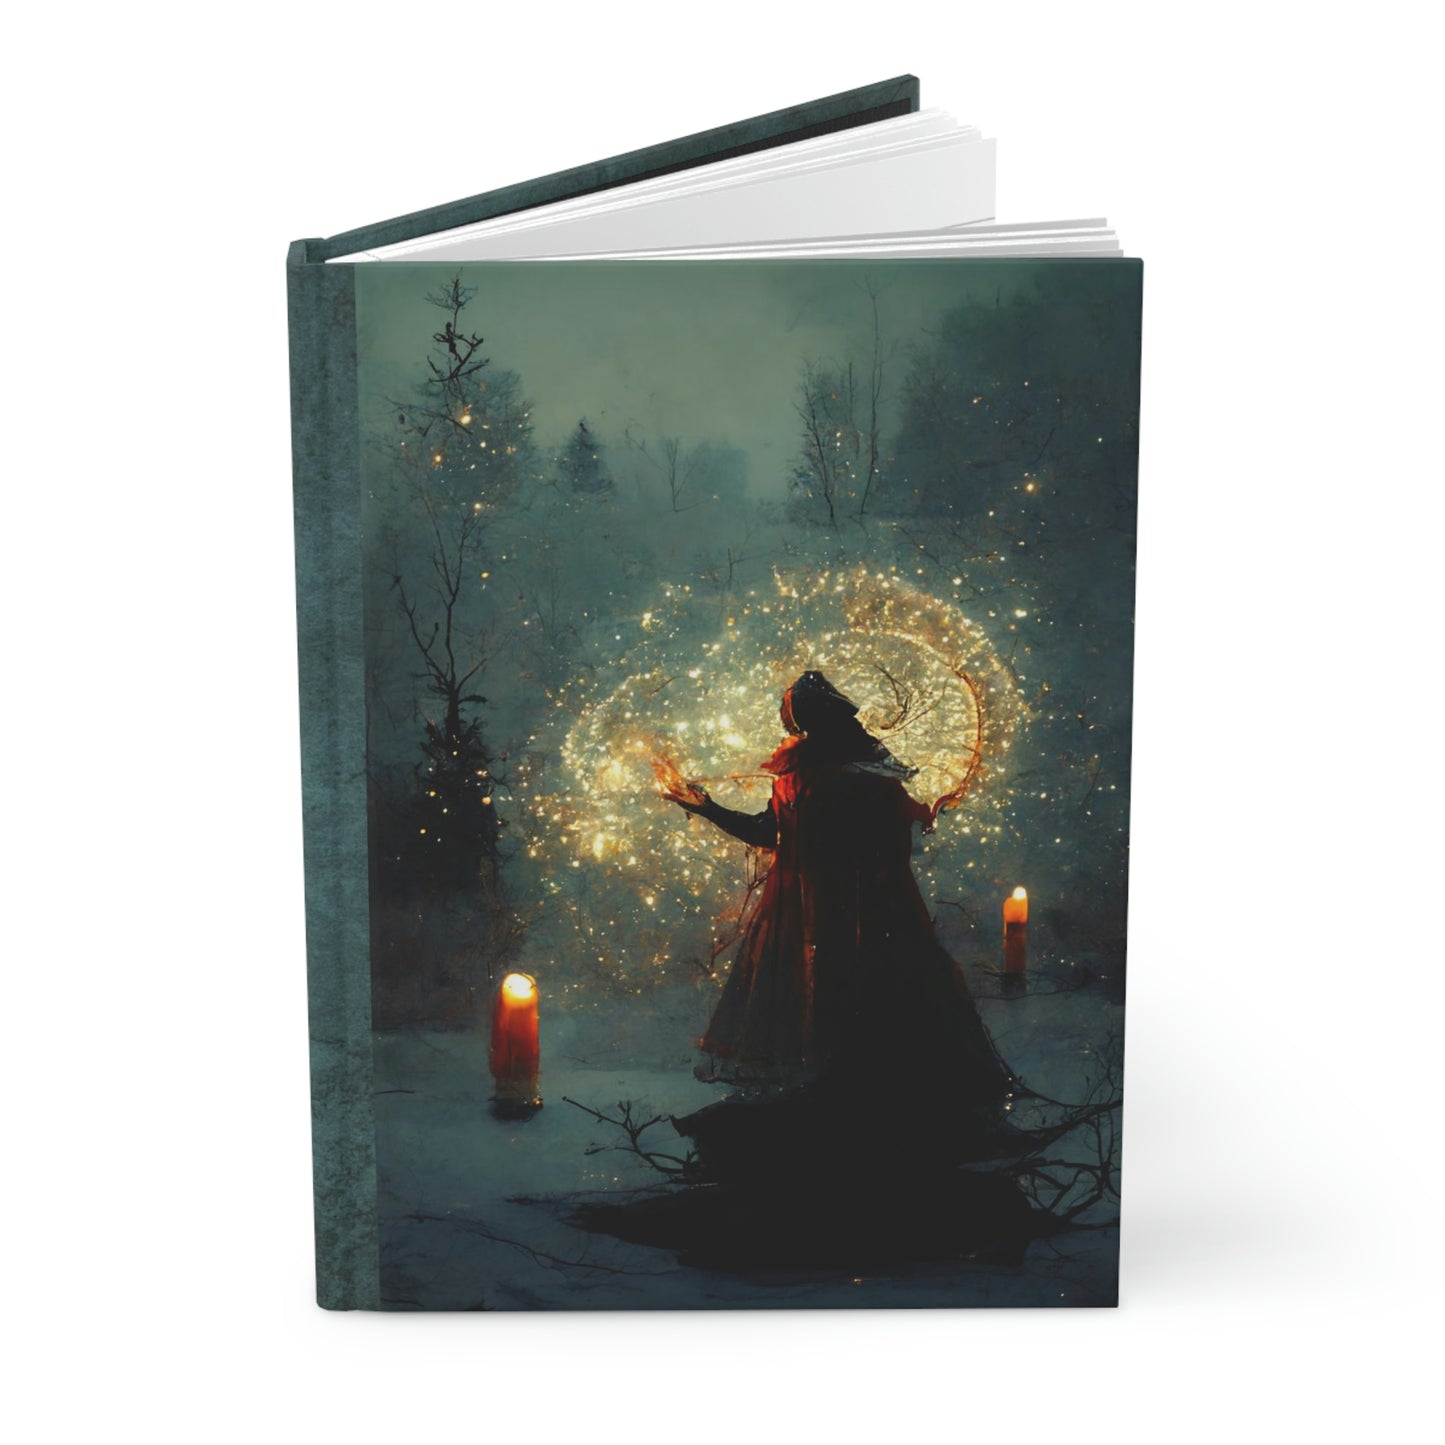 Winter Witch Book of Shadows - Witchy Notebook - Hardcover Grimoire for Witches, Pagans, Wiccans - 150 lined page notebook